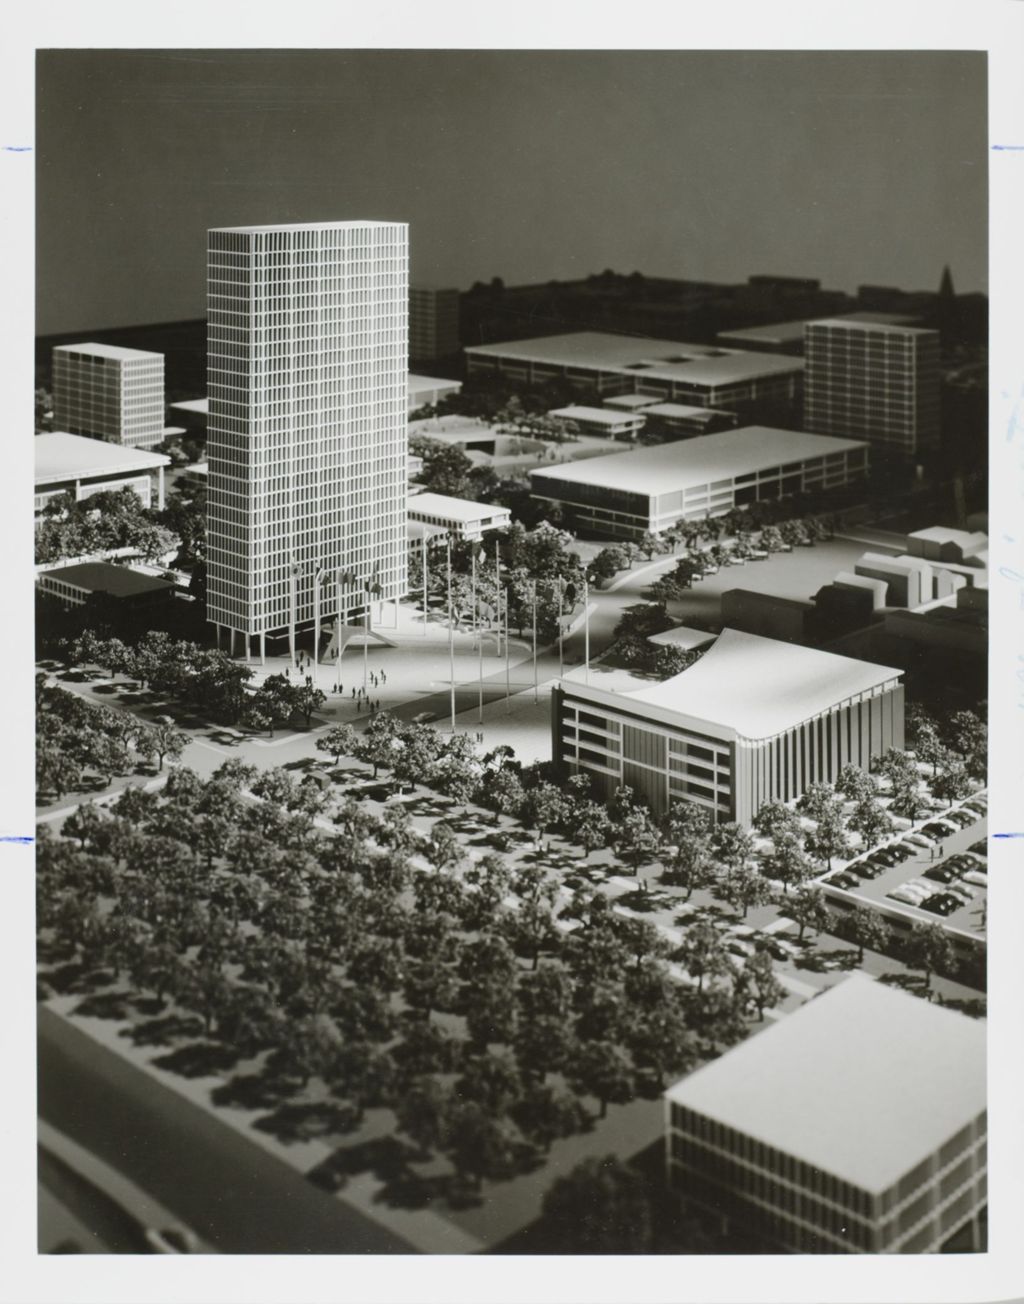 Miniature of Architectural building models of east campus  Phase 3 and beyond